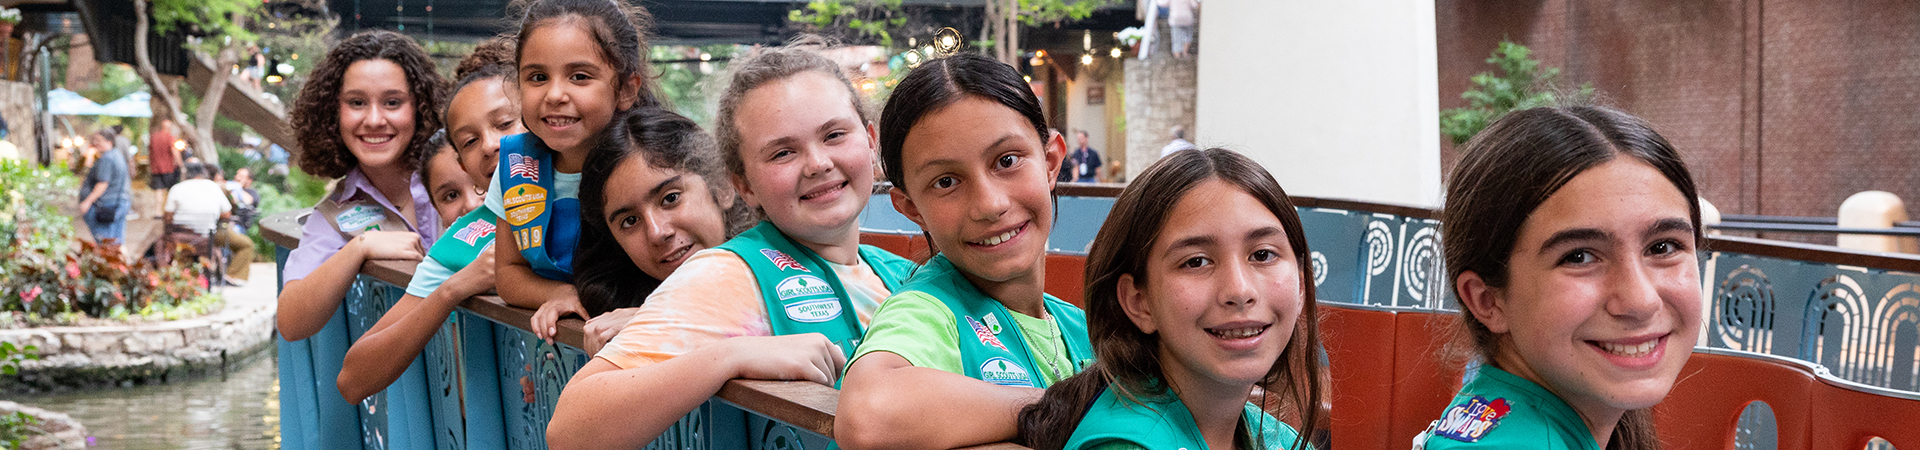  Group of girl scouts in vests sitting on a riverwalk boat and smiling  